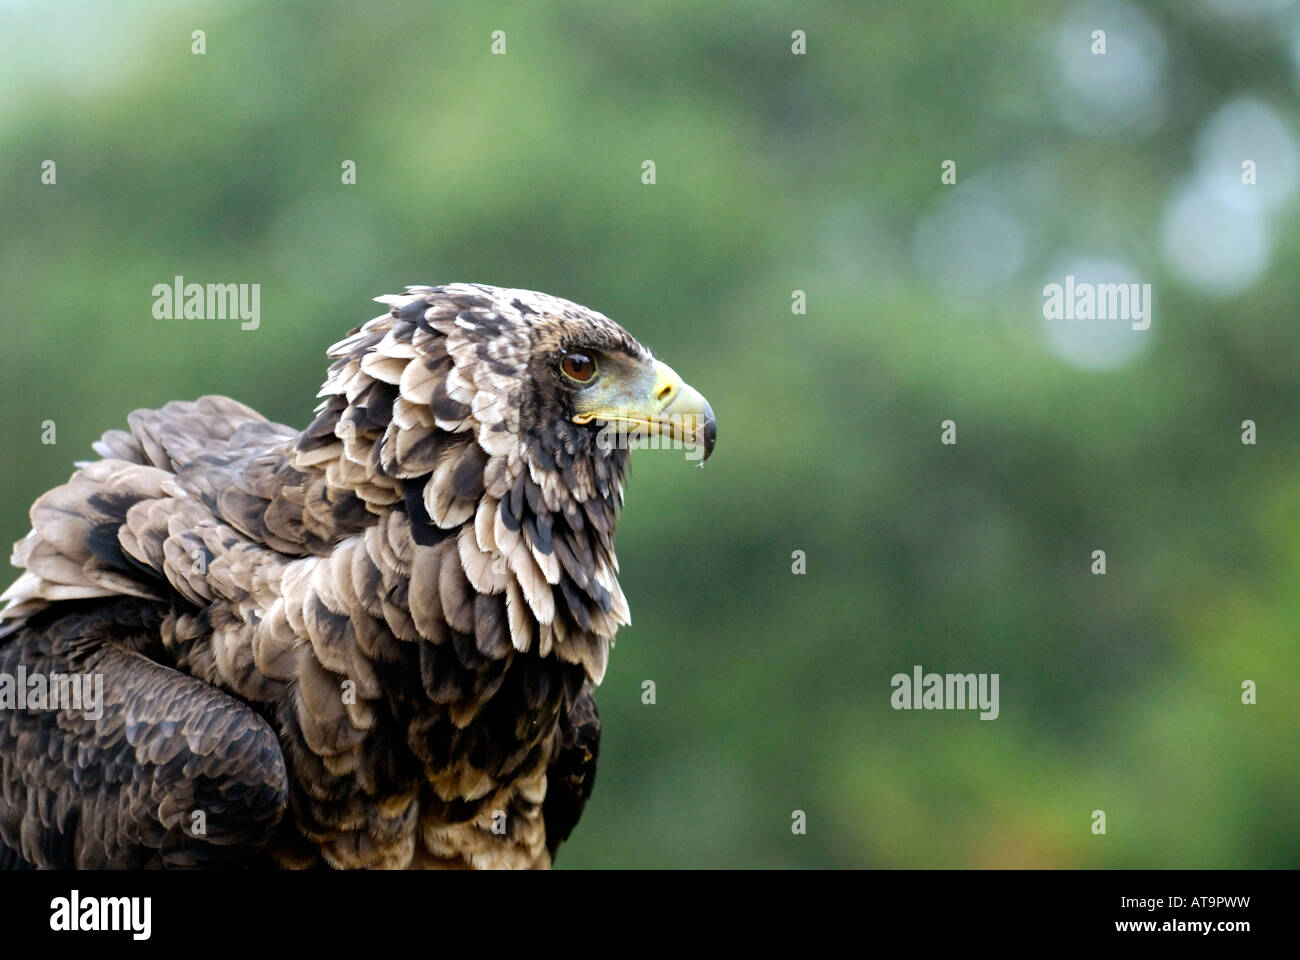 The National Birds of Prey Centre, Newent, Gloucestershire, UK Stock ...